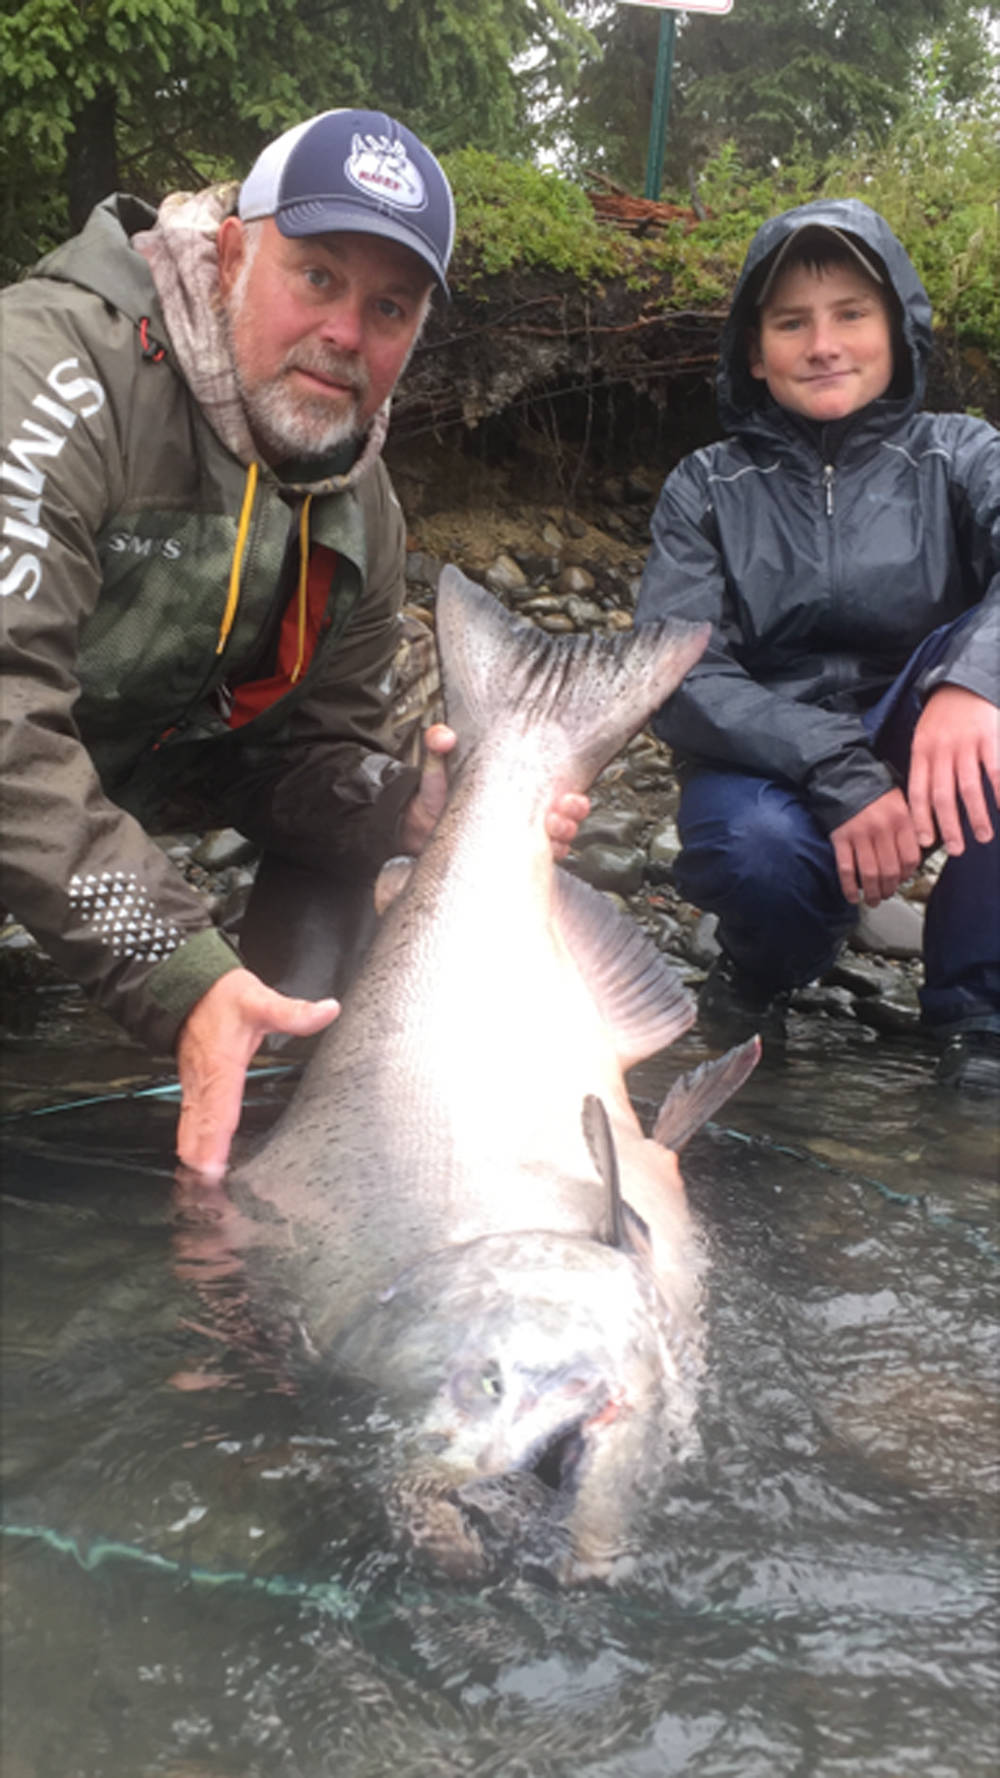 Wet and Wild Alaska Fishing owner and guide Jeff Moore (left) and Tobias Hindman of Iowa (right) pose with the king salmon Hindman caught and released on the Kenai River on Tuesday, July 24, 2018 on the Kenai River, Alaska. The king salmon measured 50 inches long and 34 inches in girth, calculating out to about 78 pounds, Moore said. The king gave Hindman a fight, jumping in and out of the water six times and going under the boat numerous times before he landed and released it. (Photo courtesy Jeff Moore)